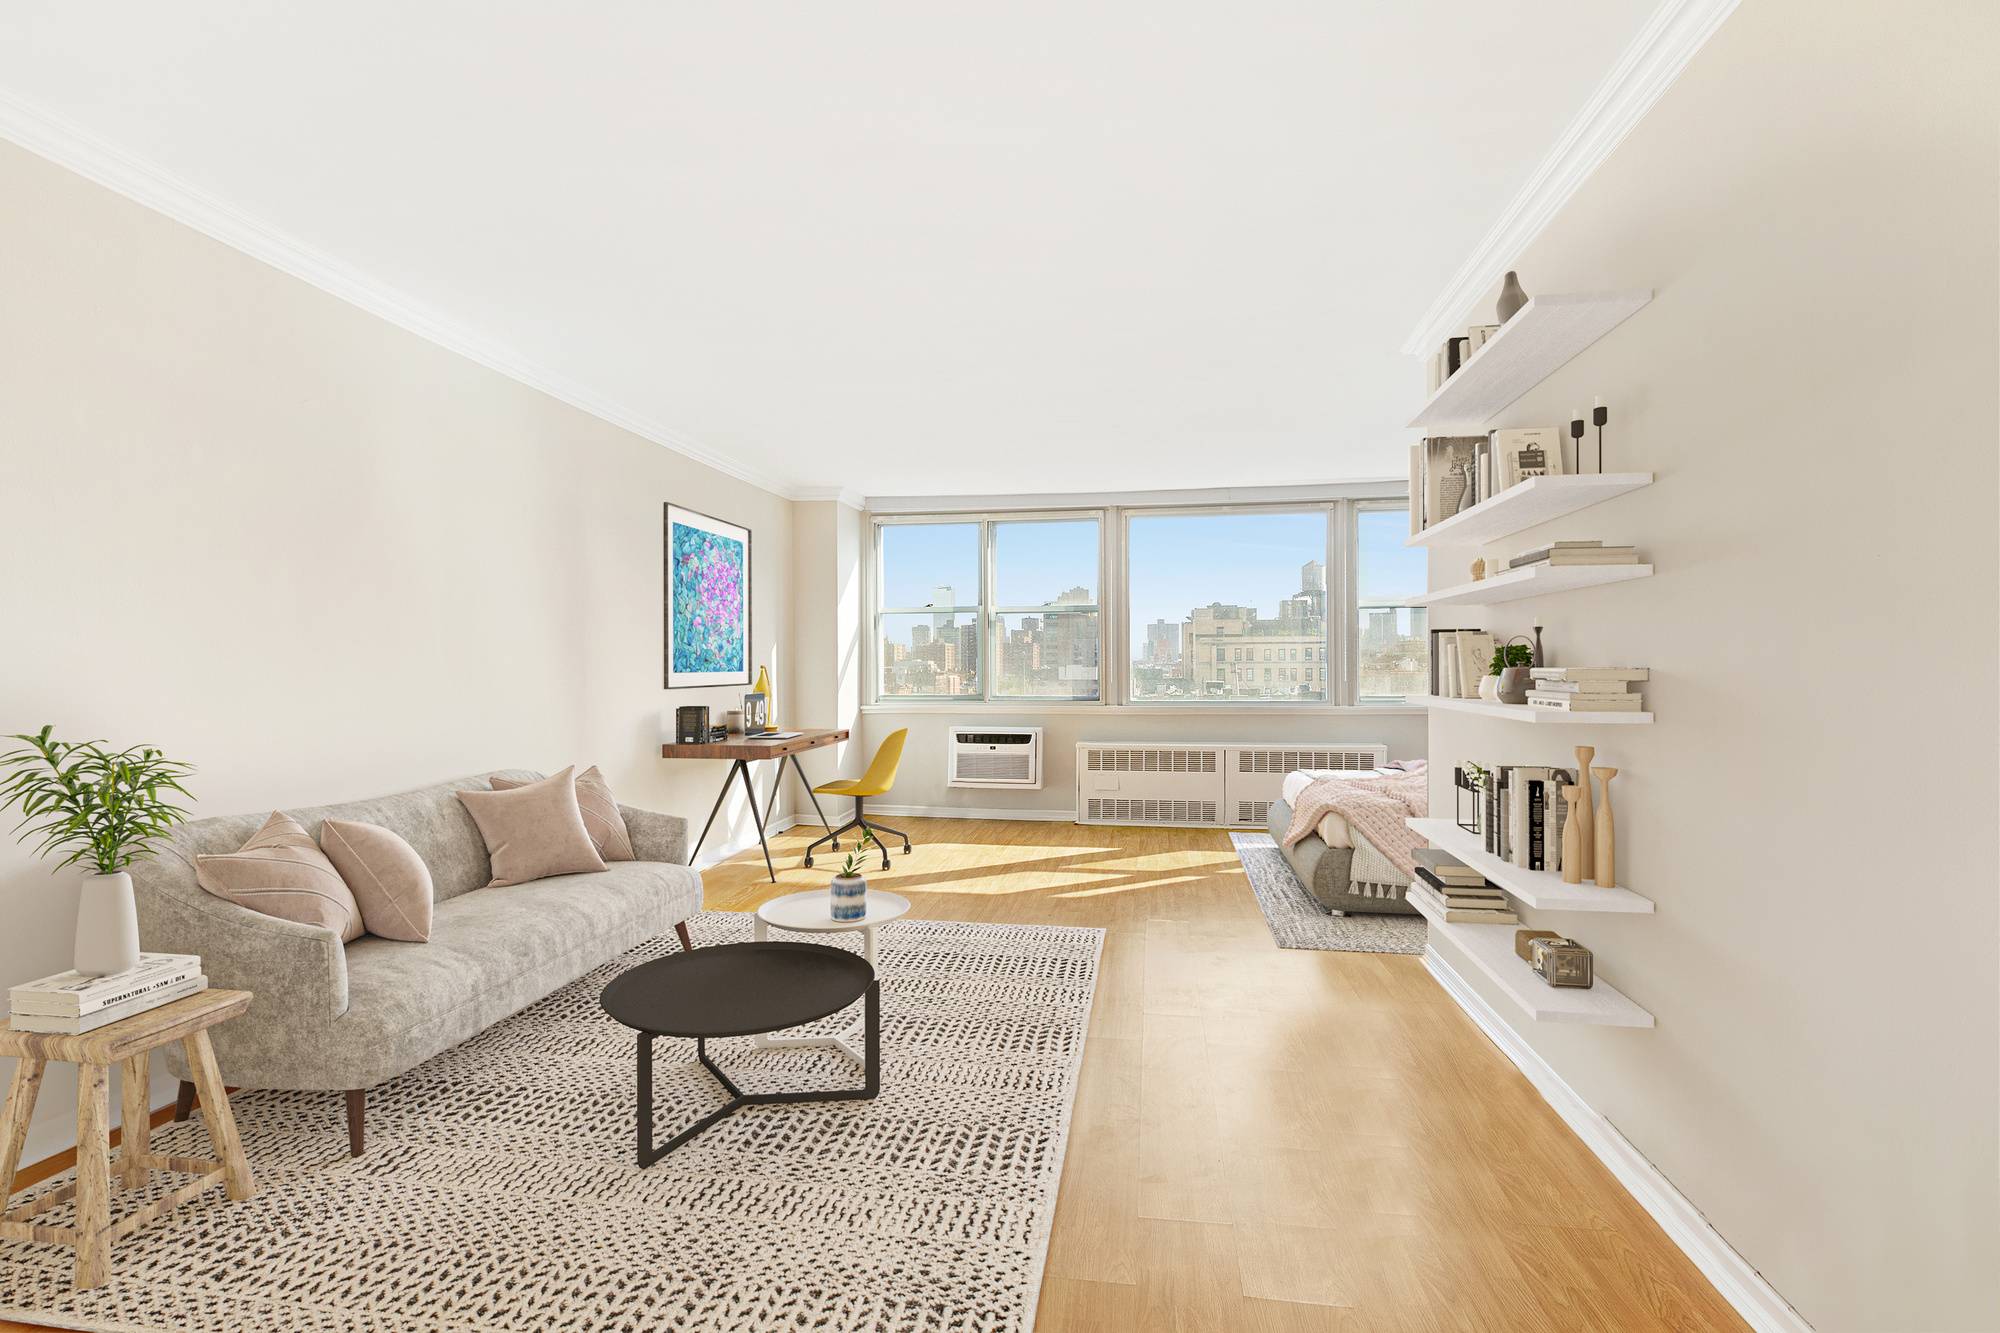 The VIEW ! Apartment 9F is an alcove studio with the best view on the market in the Village !